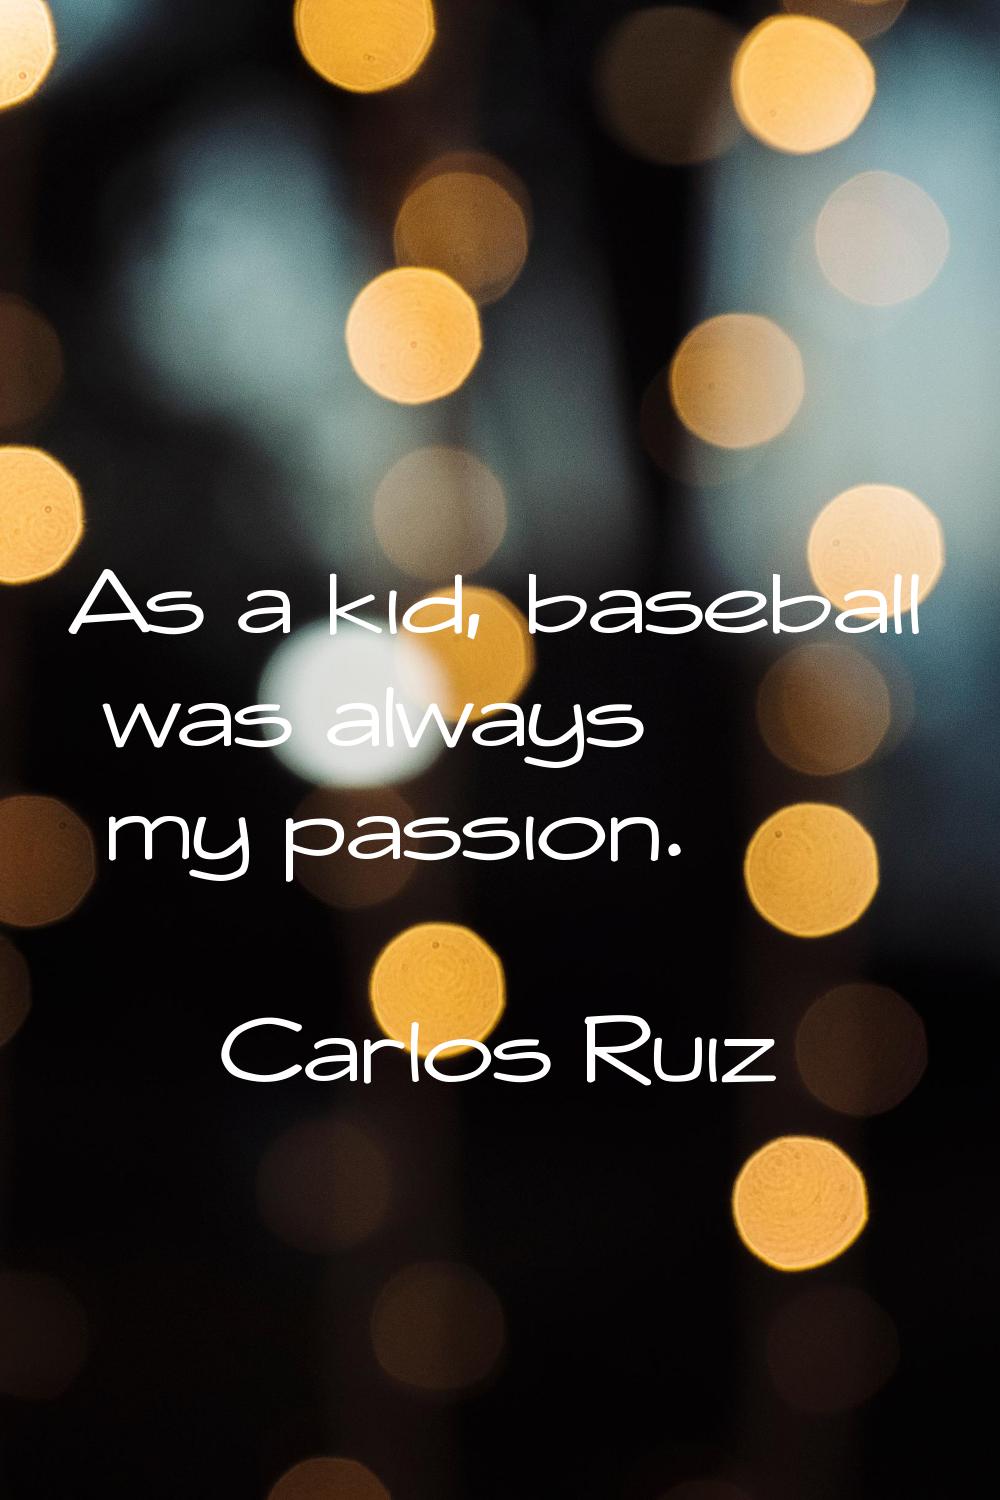 As a kid, baseball was always my passion.